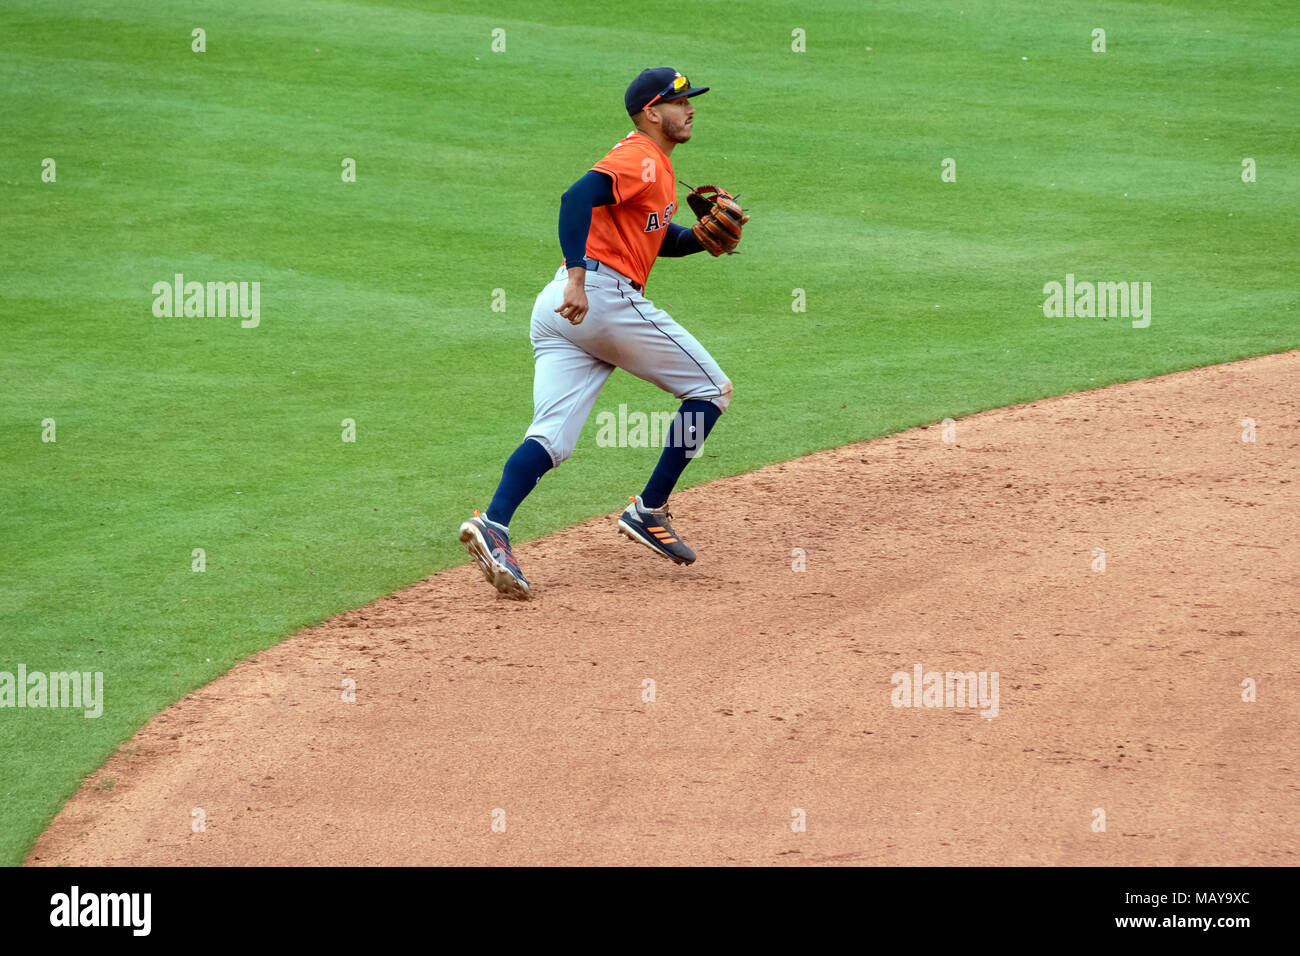 Houston Astros short stop Carlos Correa running to make plays against the Texas Rangers in Game Four of the season opener. Astros won the series 3-1. Stock Photo